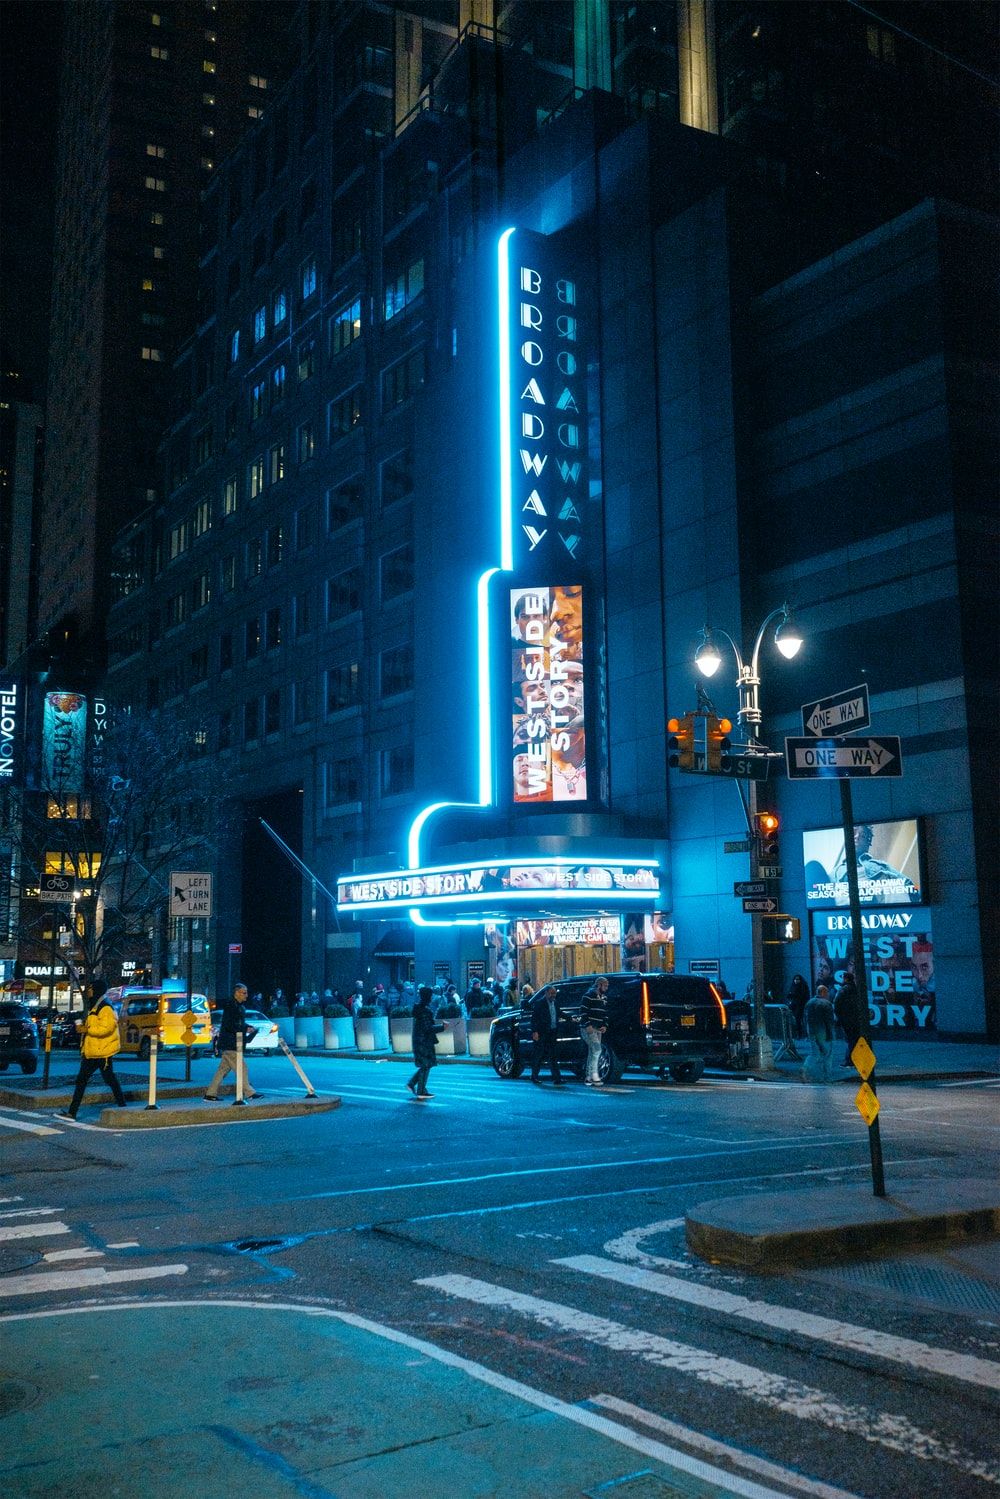 A blue neon sign that says Broadway on a building - Broadway